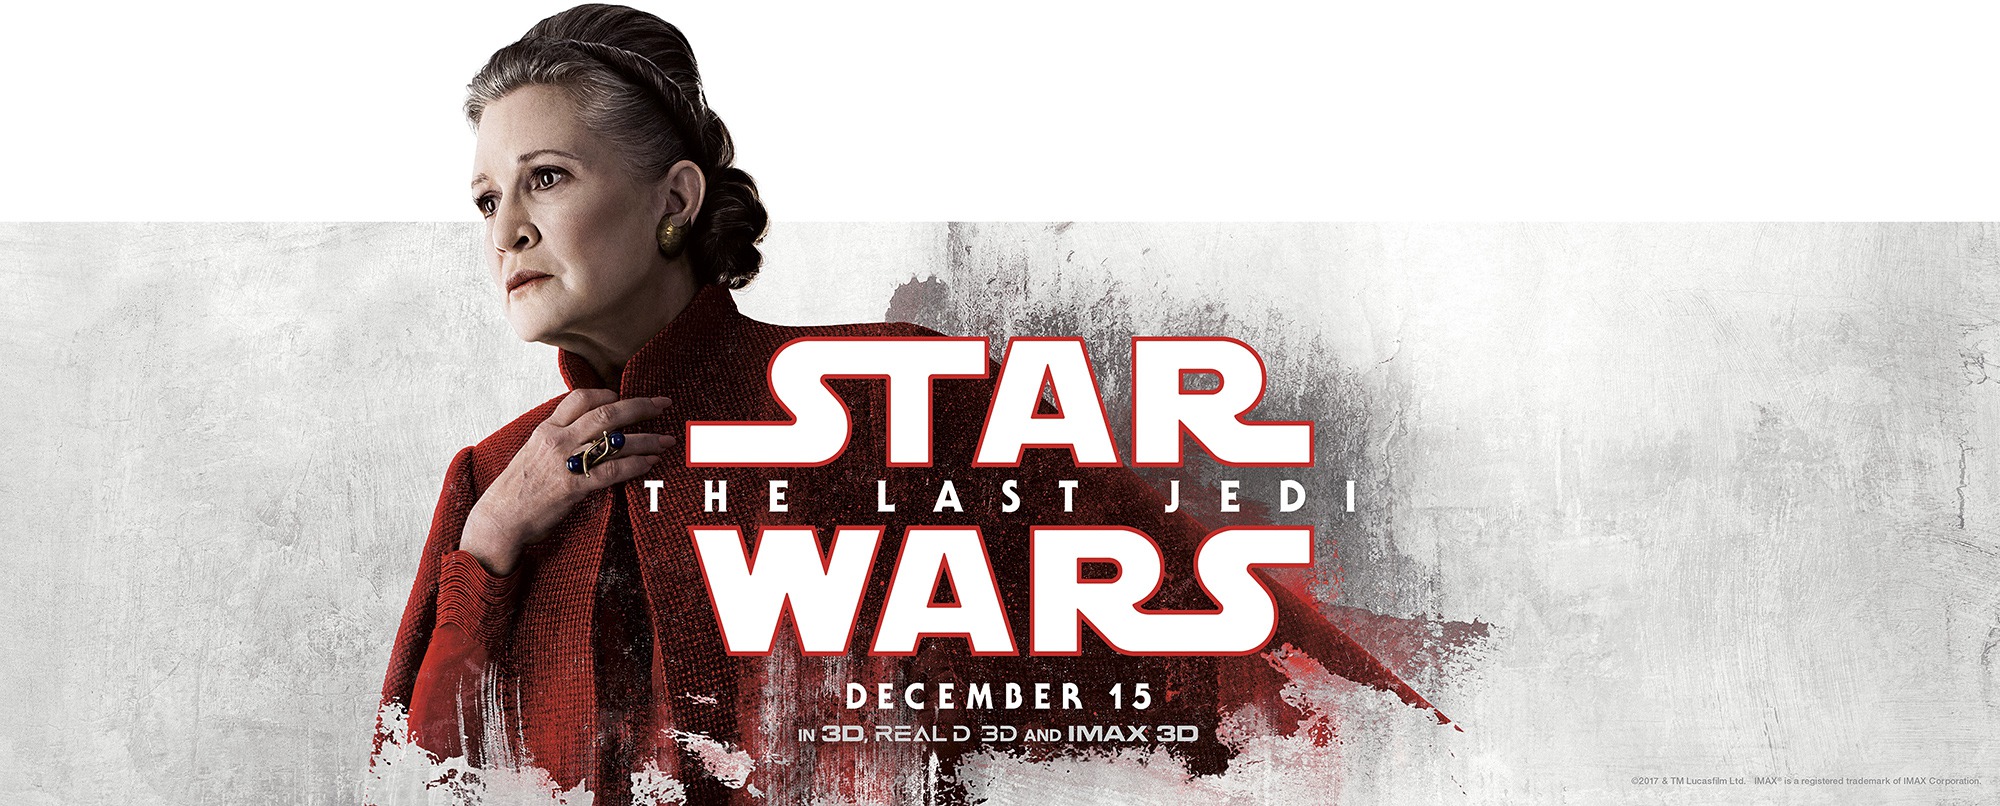 Mega Sized Movie Poster Image for Star Wars: The Last Jedi (#64 of 67)